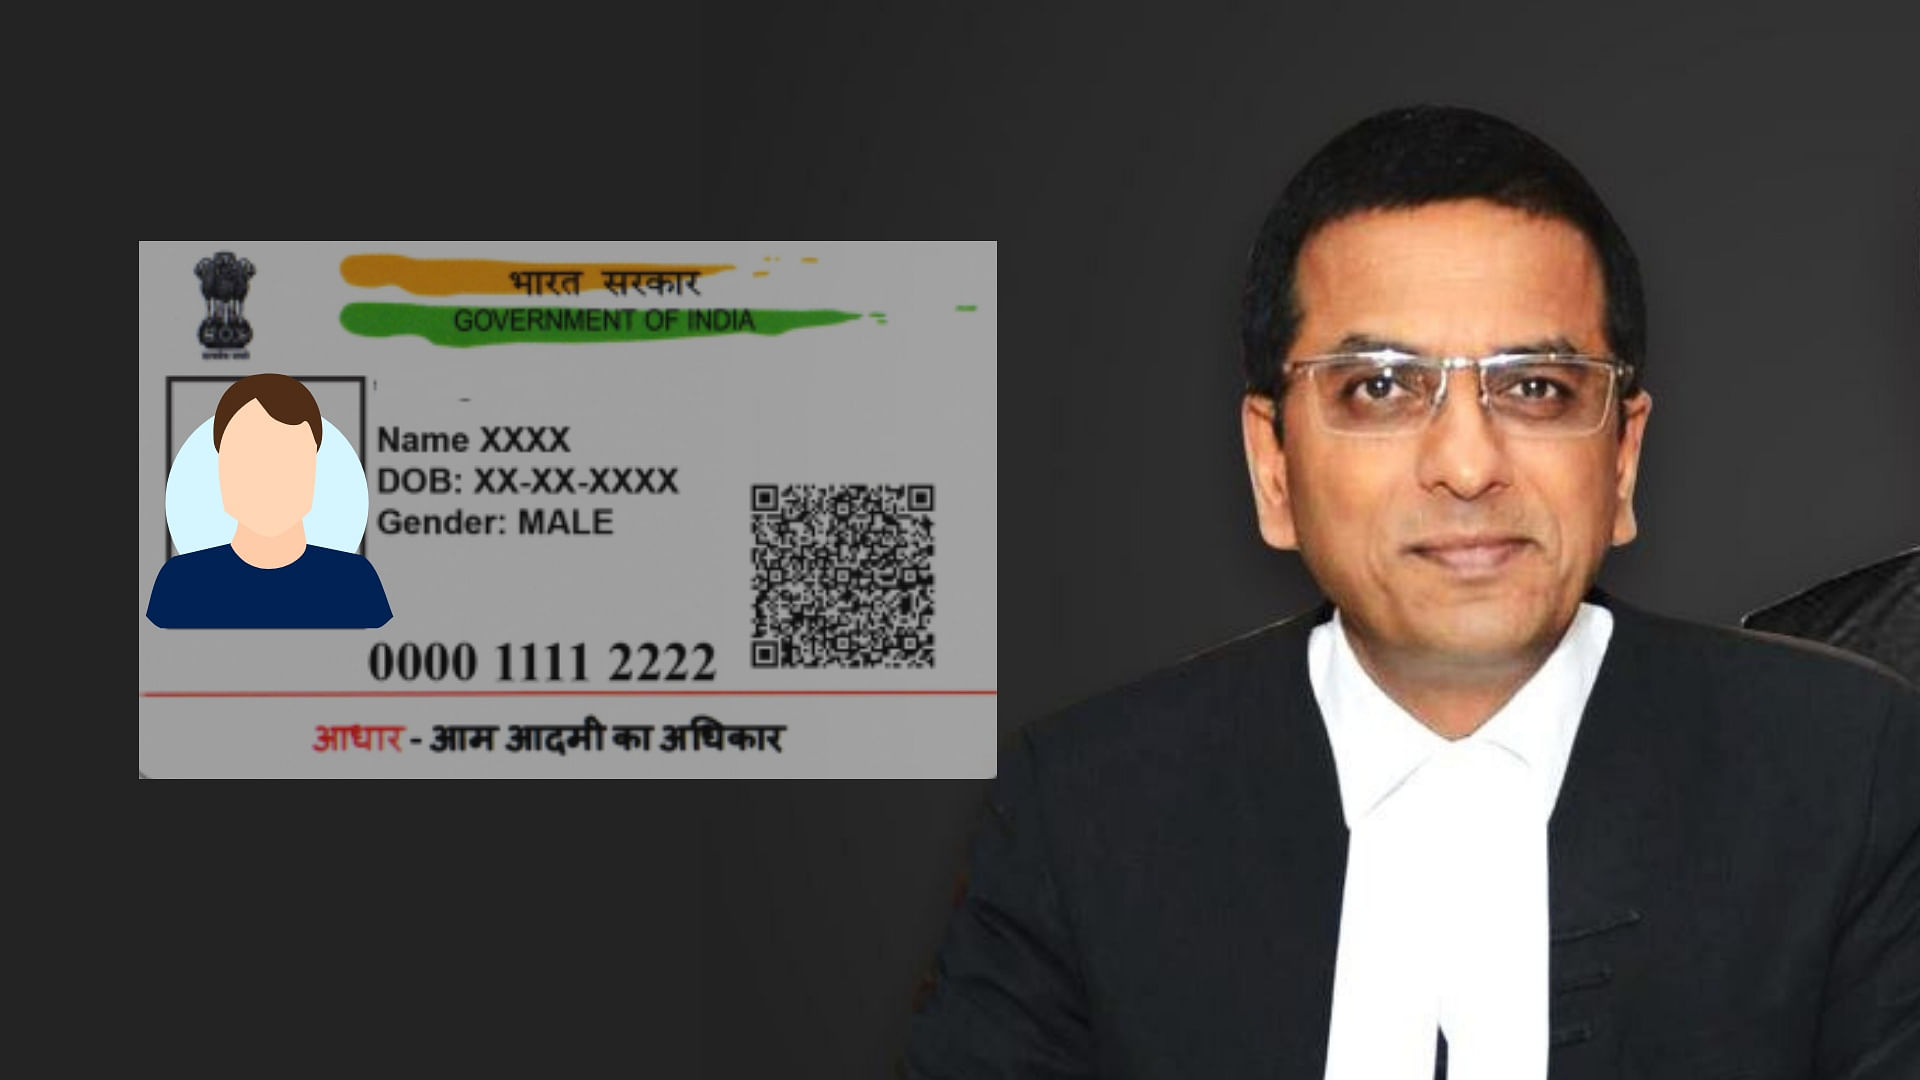 Justice DY Chandrachud said passing the Aadhaar Act as a Money Bill is a “fraud on the Constitution”.